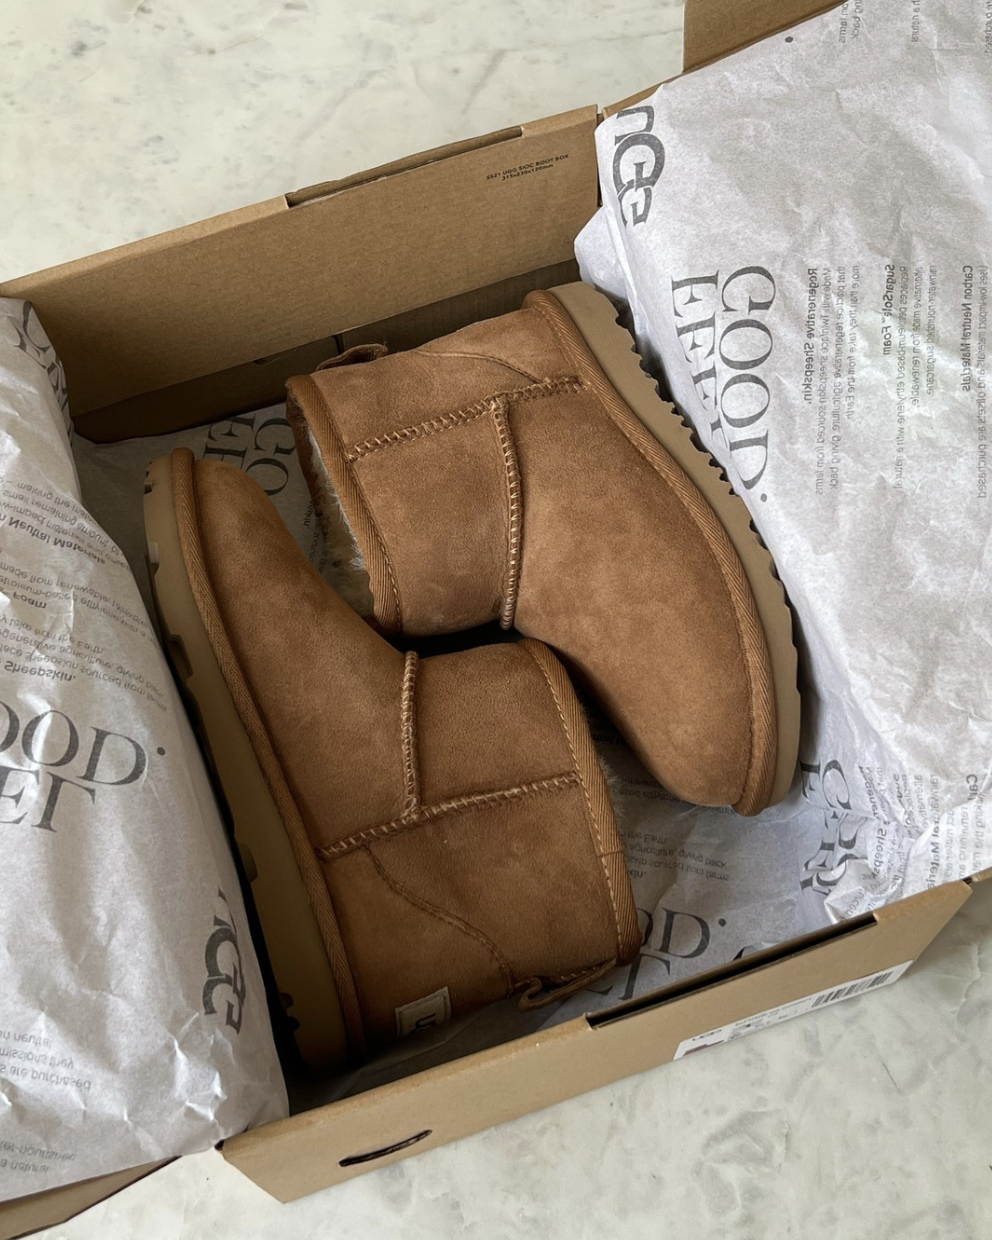 uggs in a box